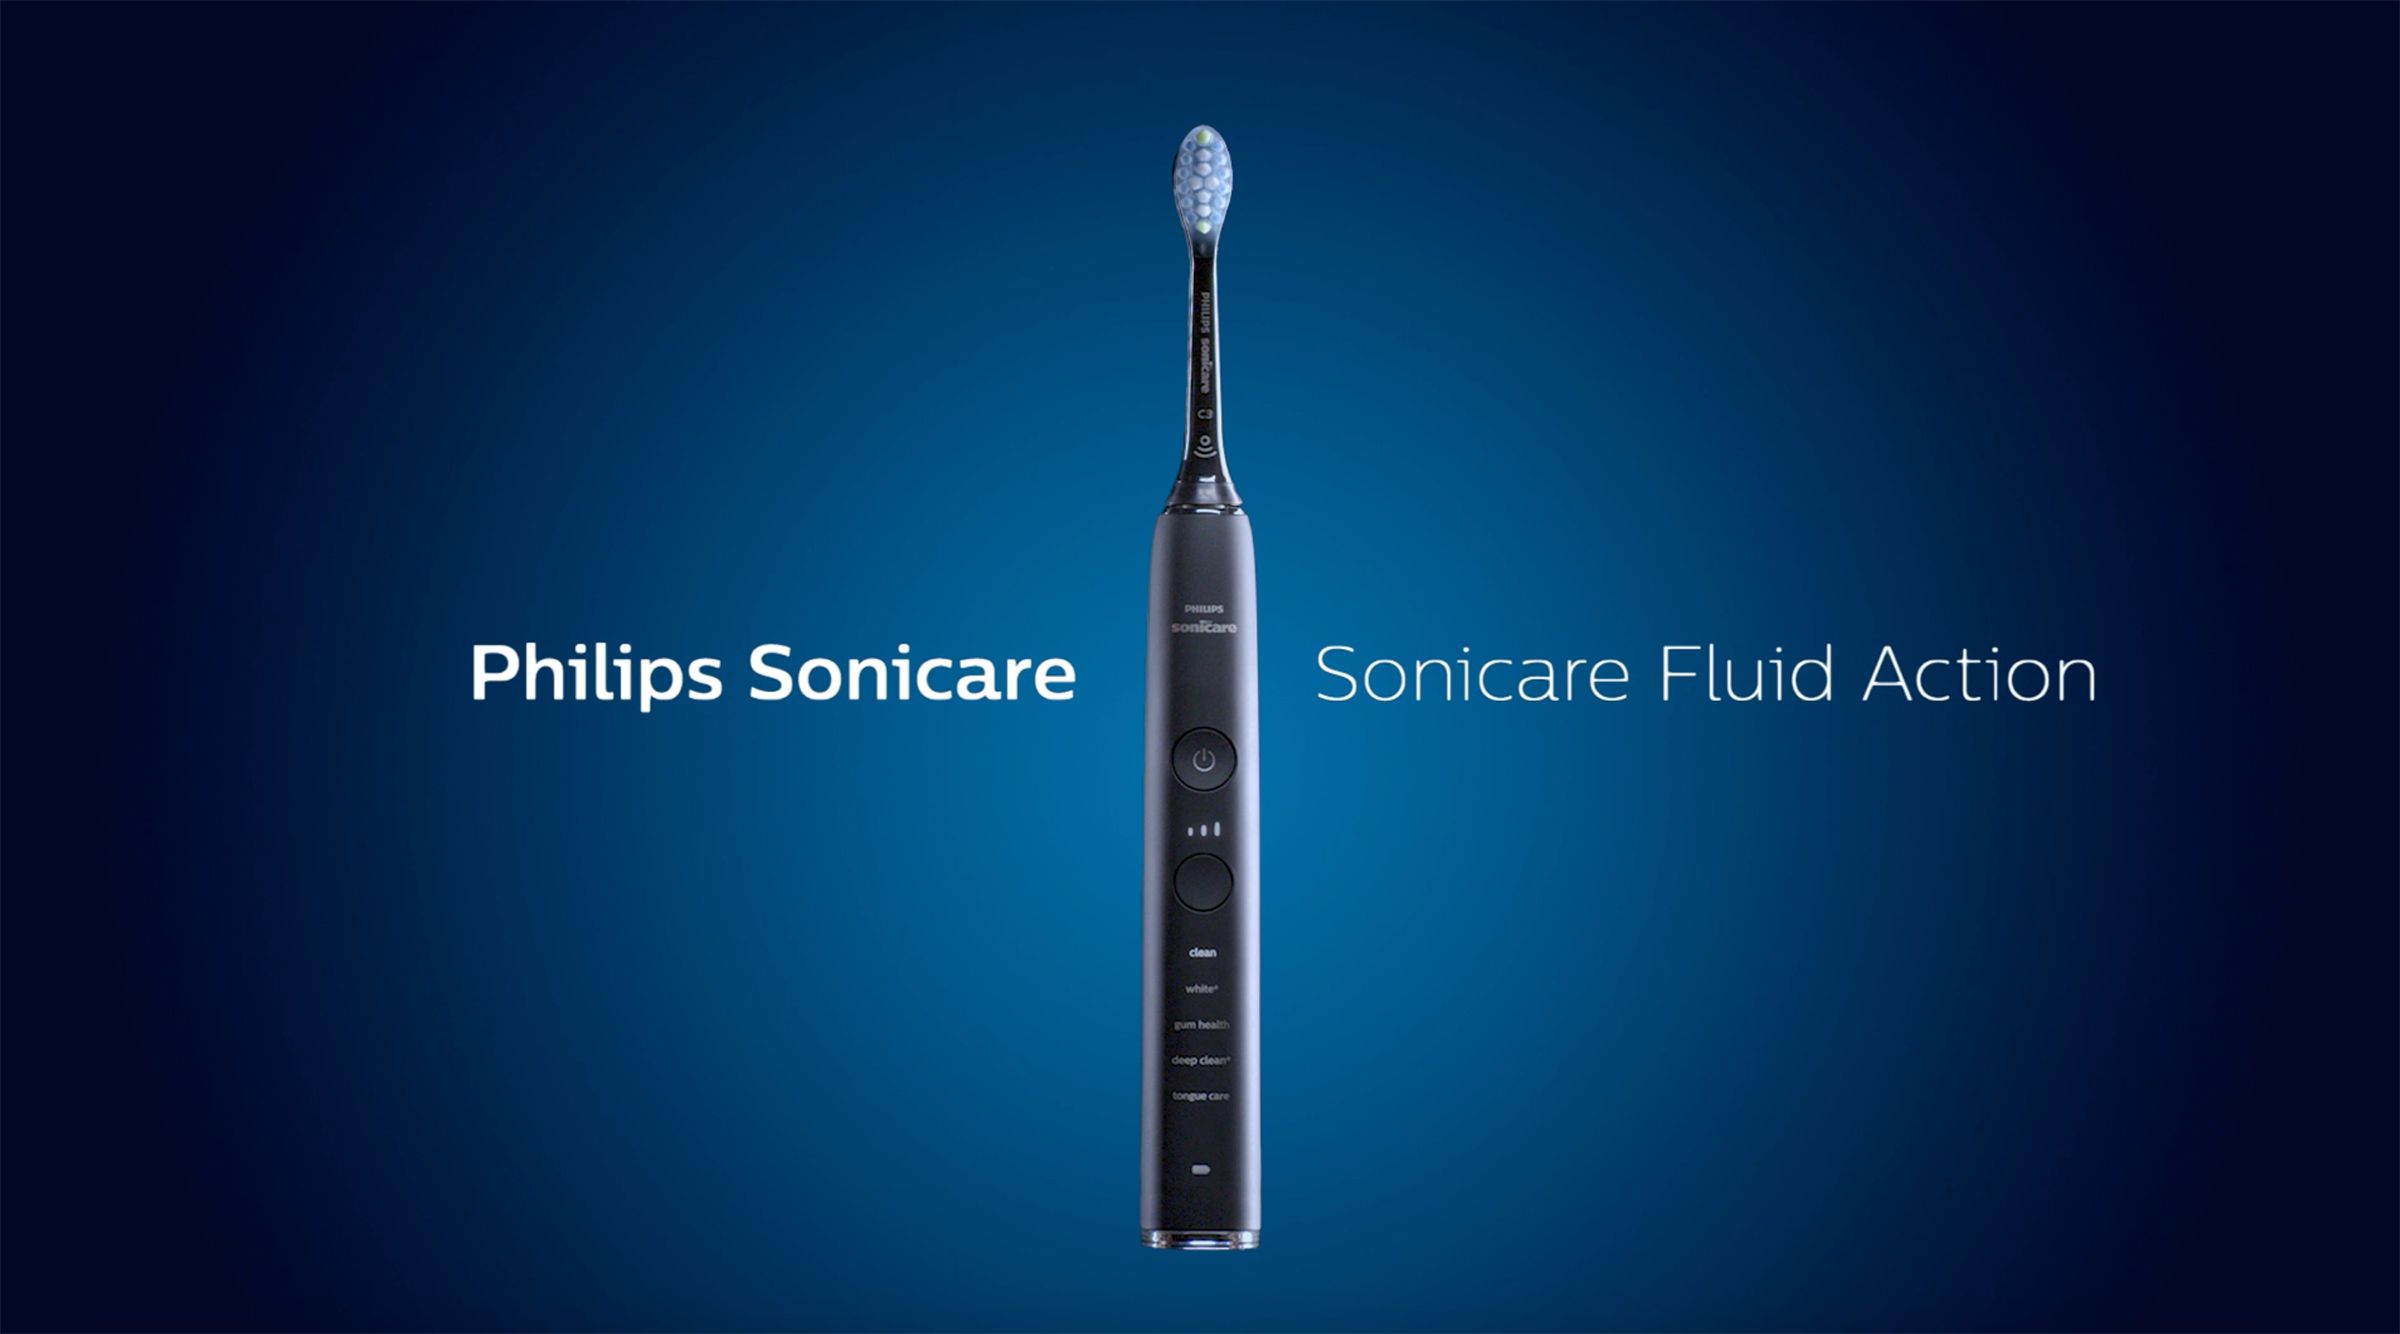 A video about Philips Sonicare toothbrushes